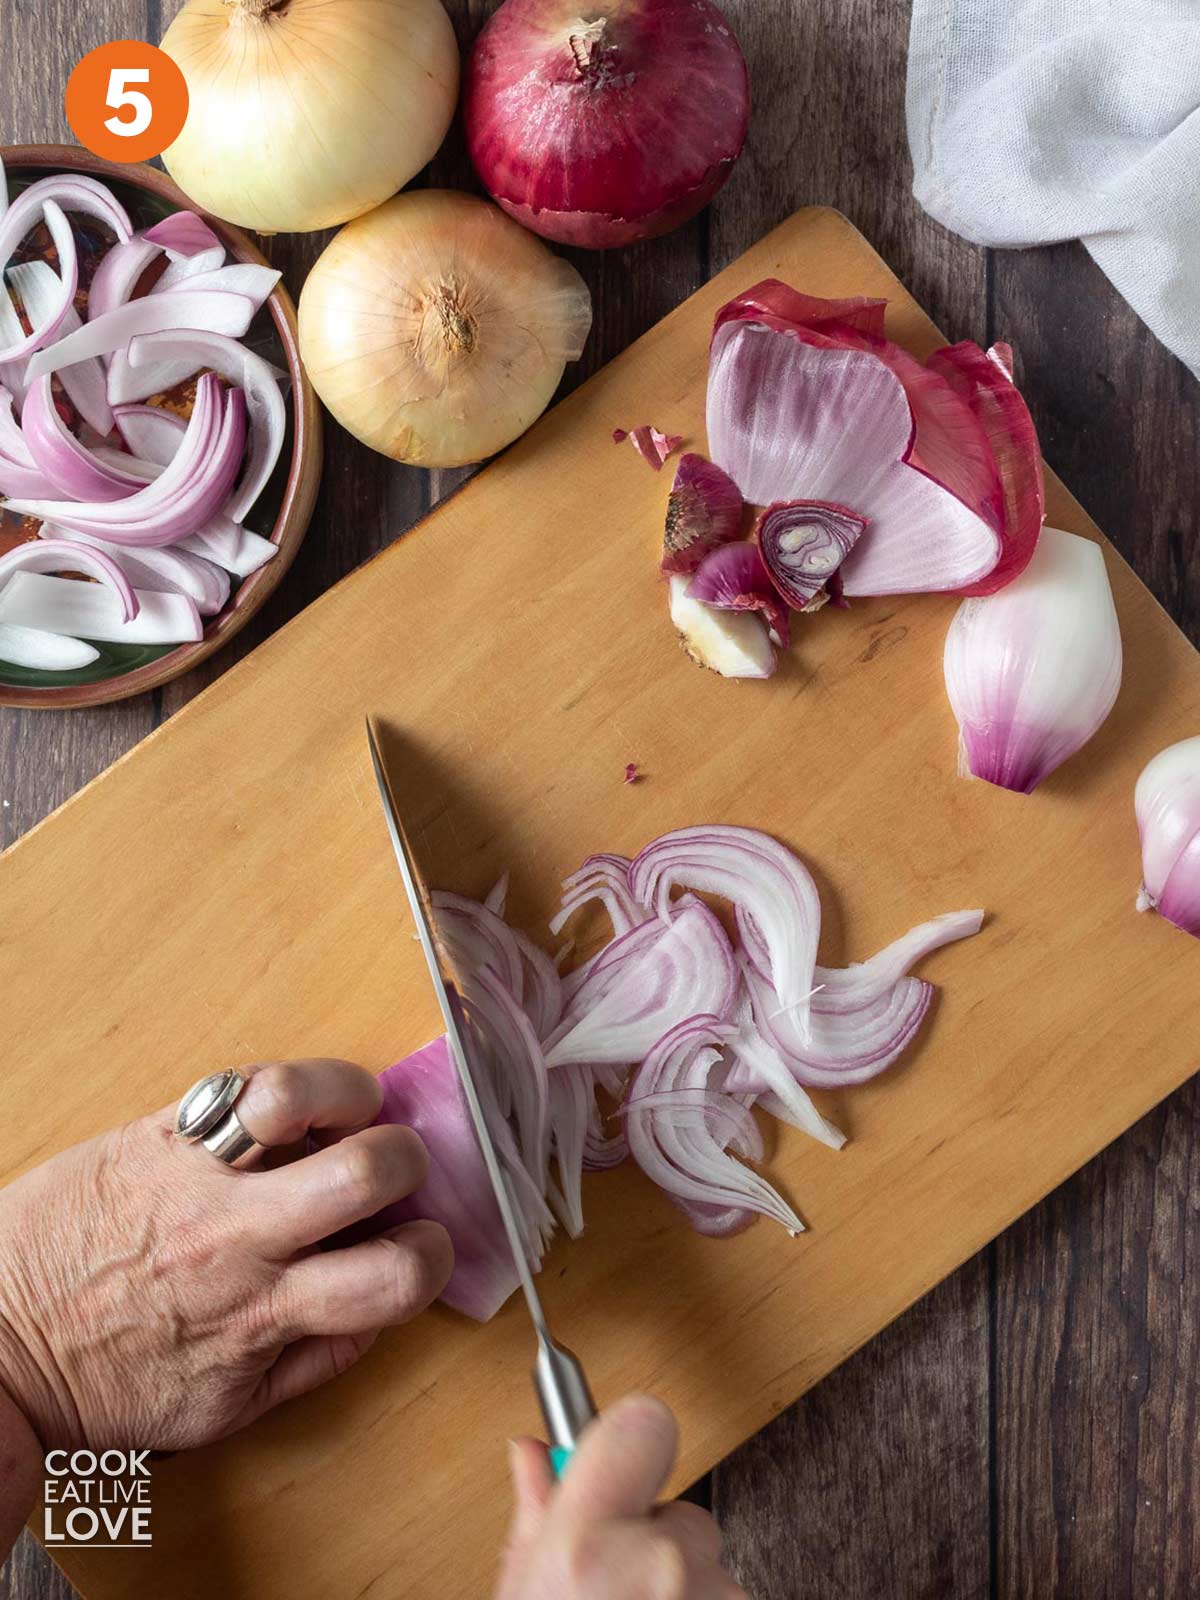 A hand holding the onion and the other hand cutting with a knife into slices.